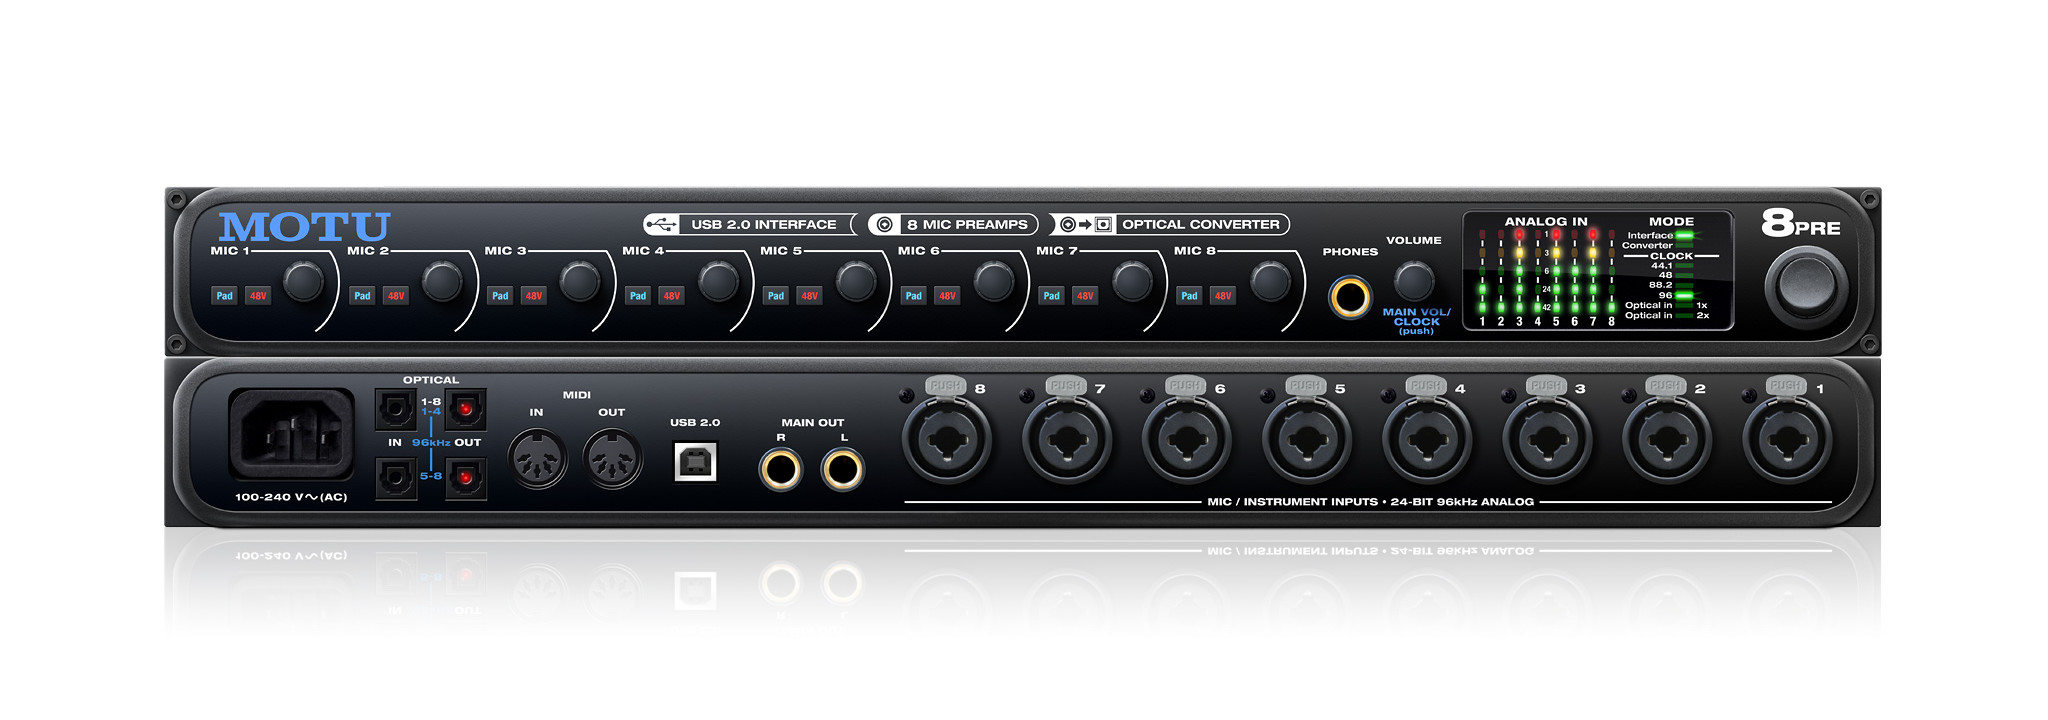 MOTU 8Pre USB audio interface and expander now shipping